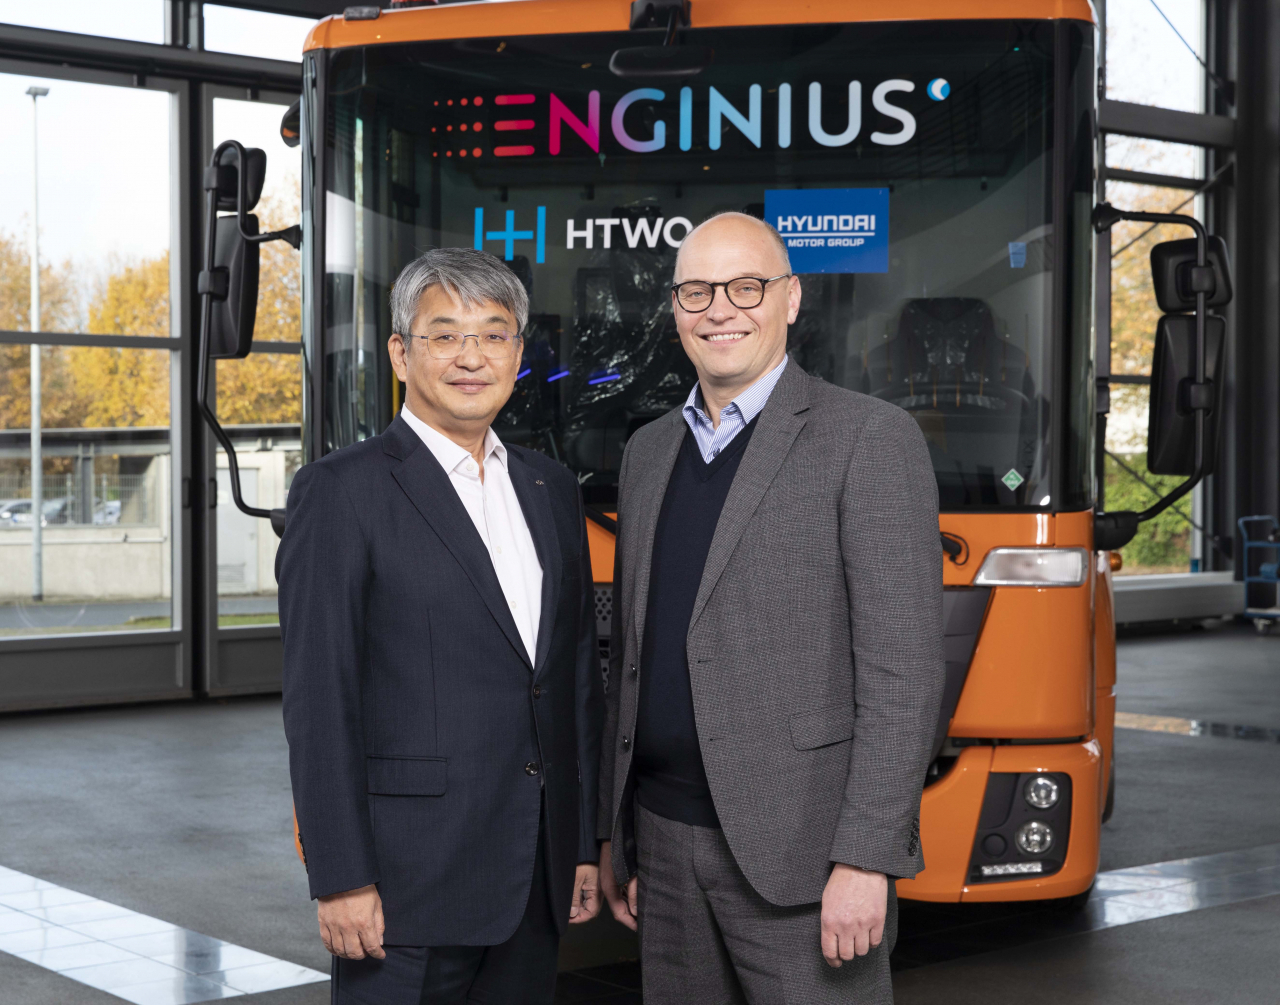 Hyundai Motor Group Vice President Lim Tae-won (left) shakes hands with Patrick Hermanspann, CEO at Faun Group, at the German carmaker's headquarters in Osterholz Scharmbeck, on Thursday, after celebrating a new partnership, under which Hyundai supplies 1,100 hydrogen fuel-cell systems for Faun's eco-friendly garbage cars and cargo trucks. (Hyundai Motor Group)